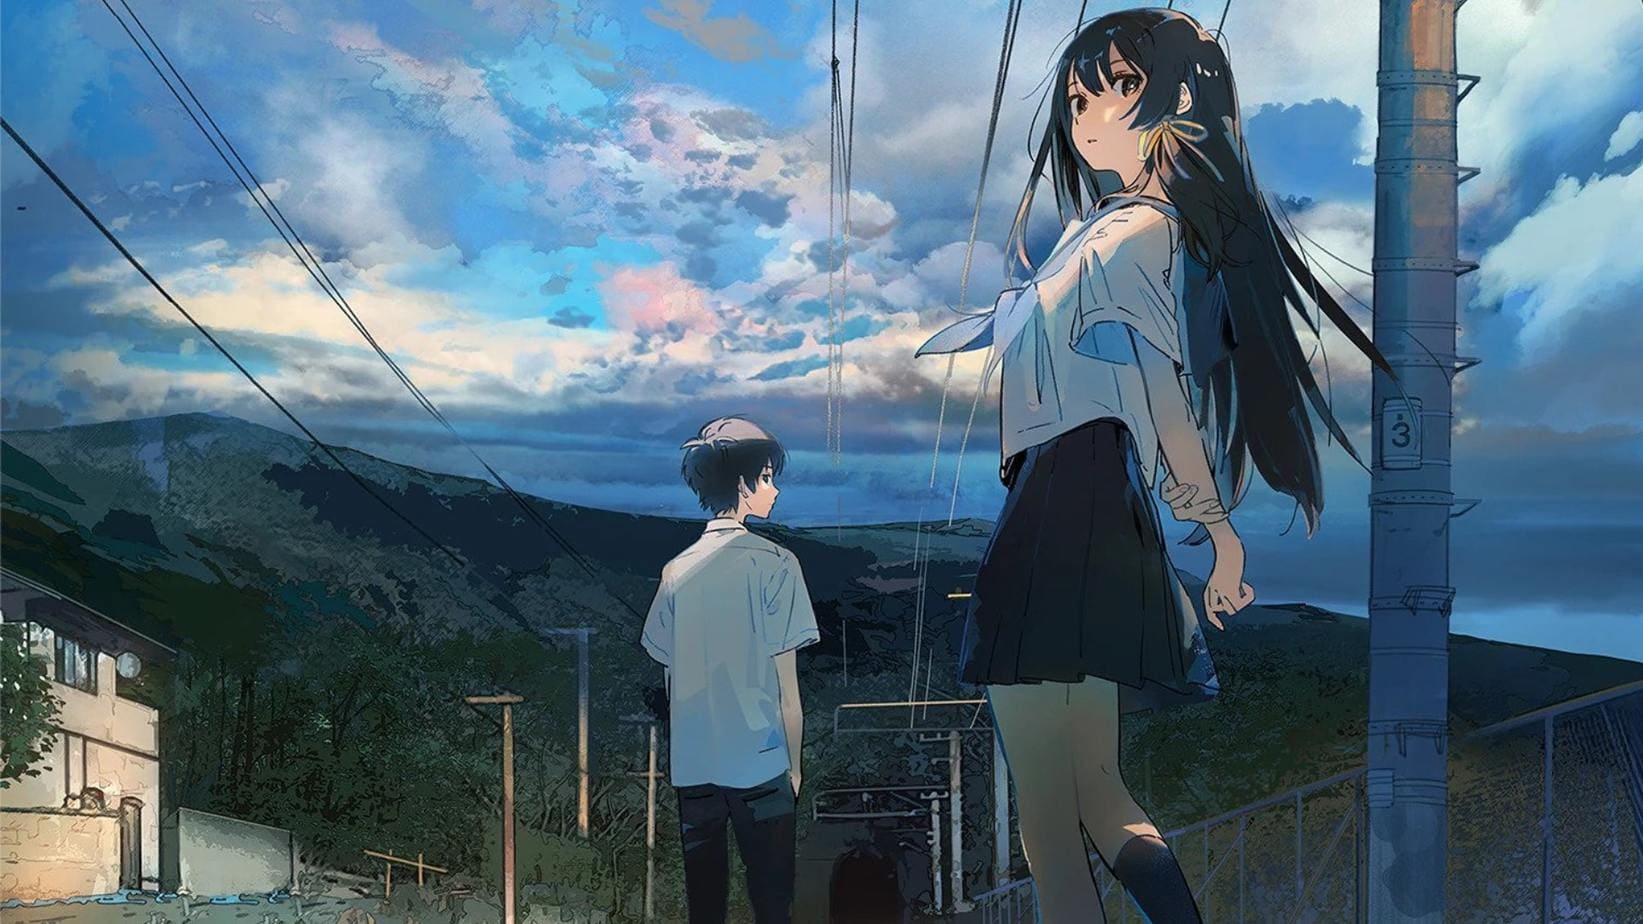 Best Animes to Watch Instead of Going Outside | POPSUGAR Entertainment UK